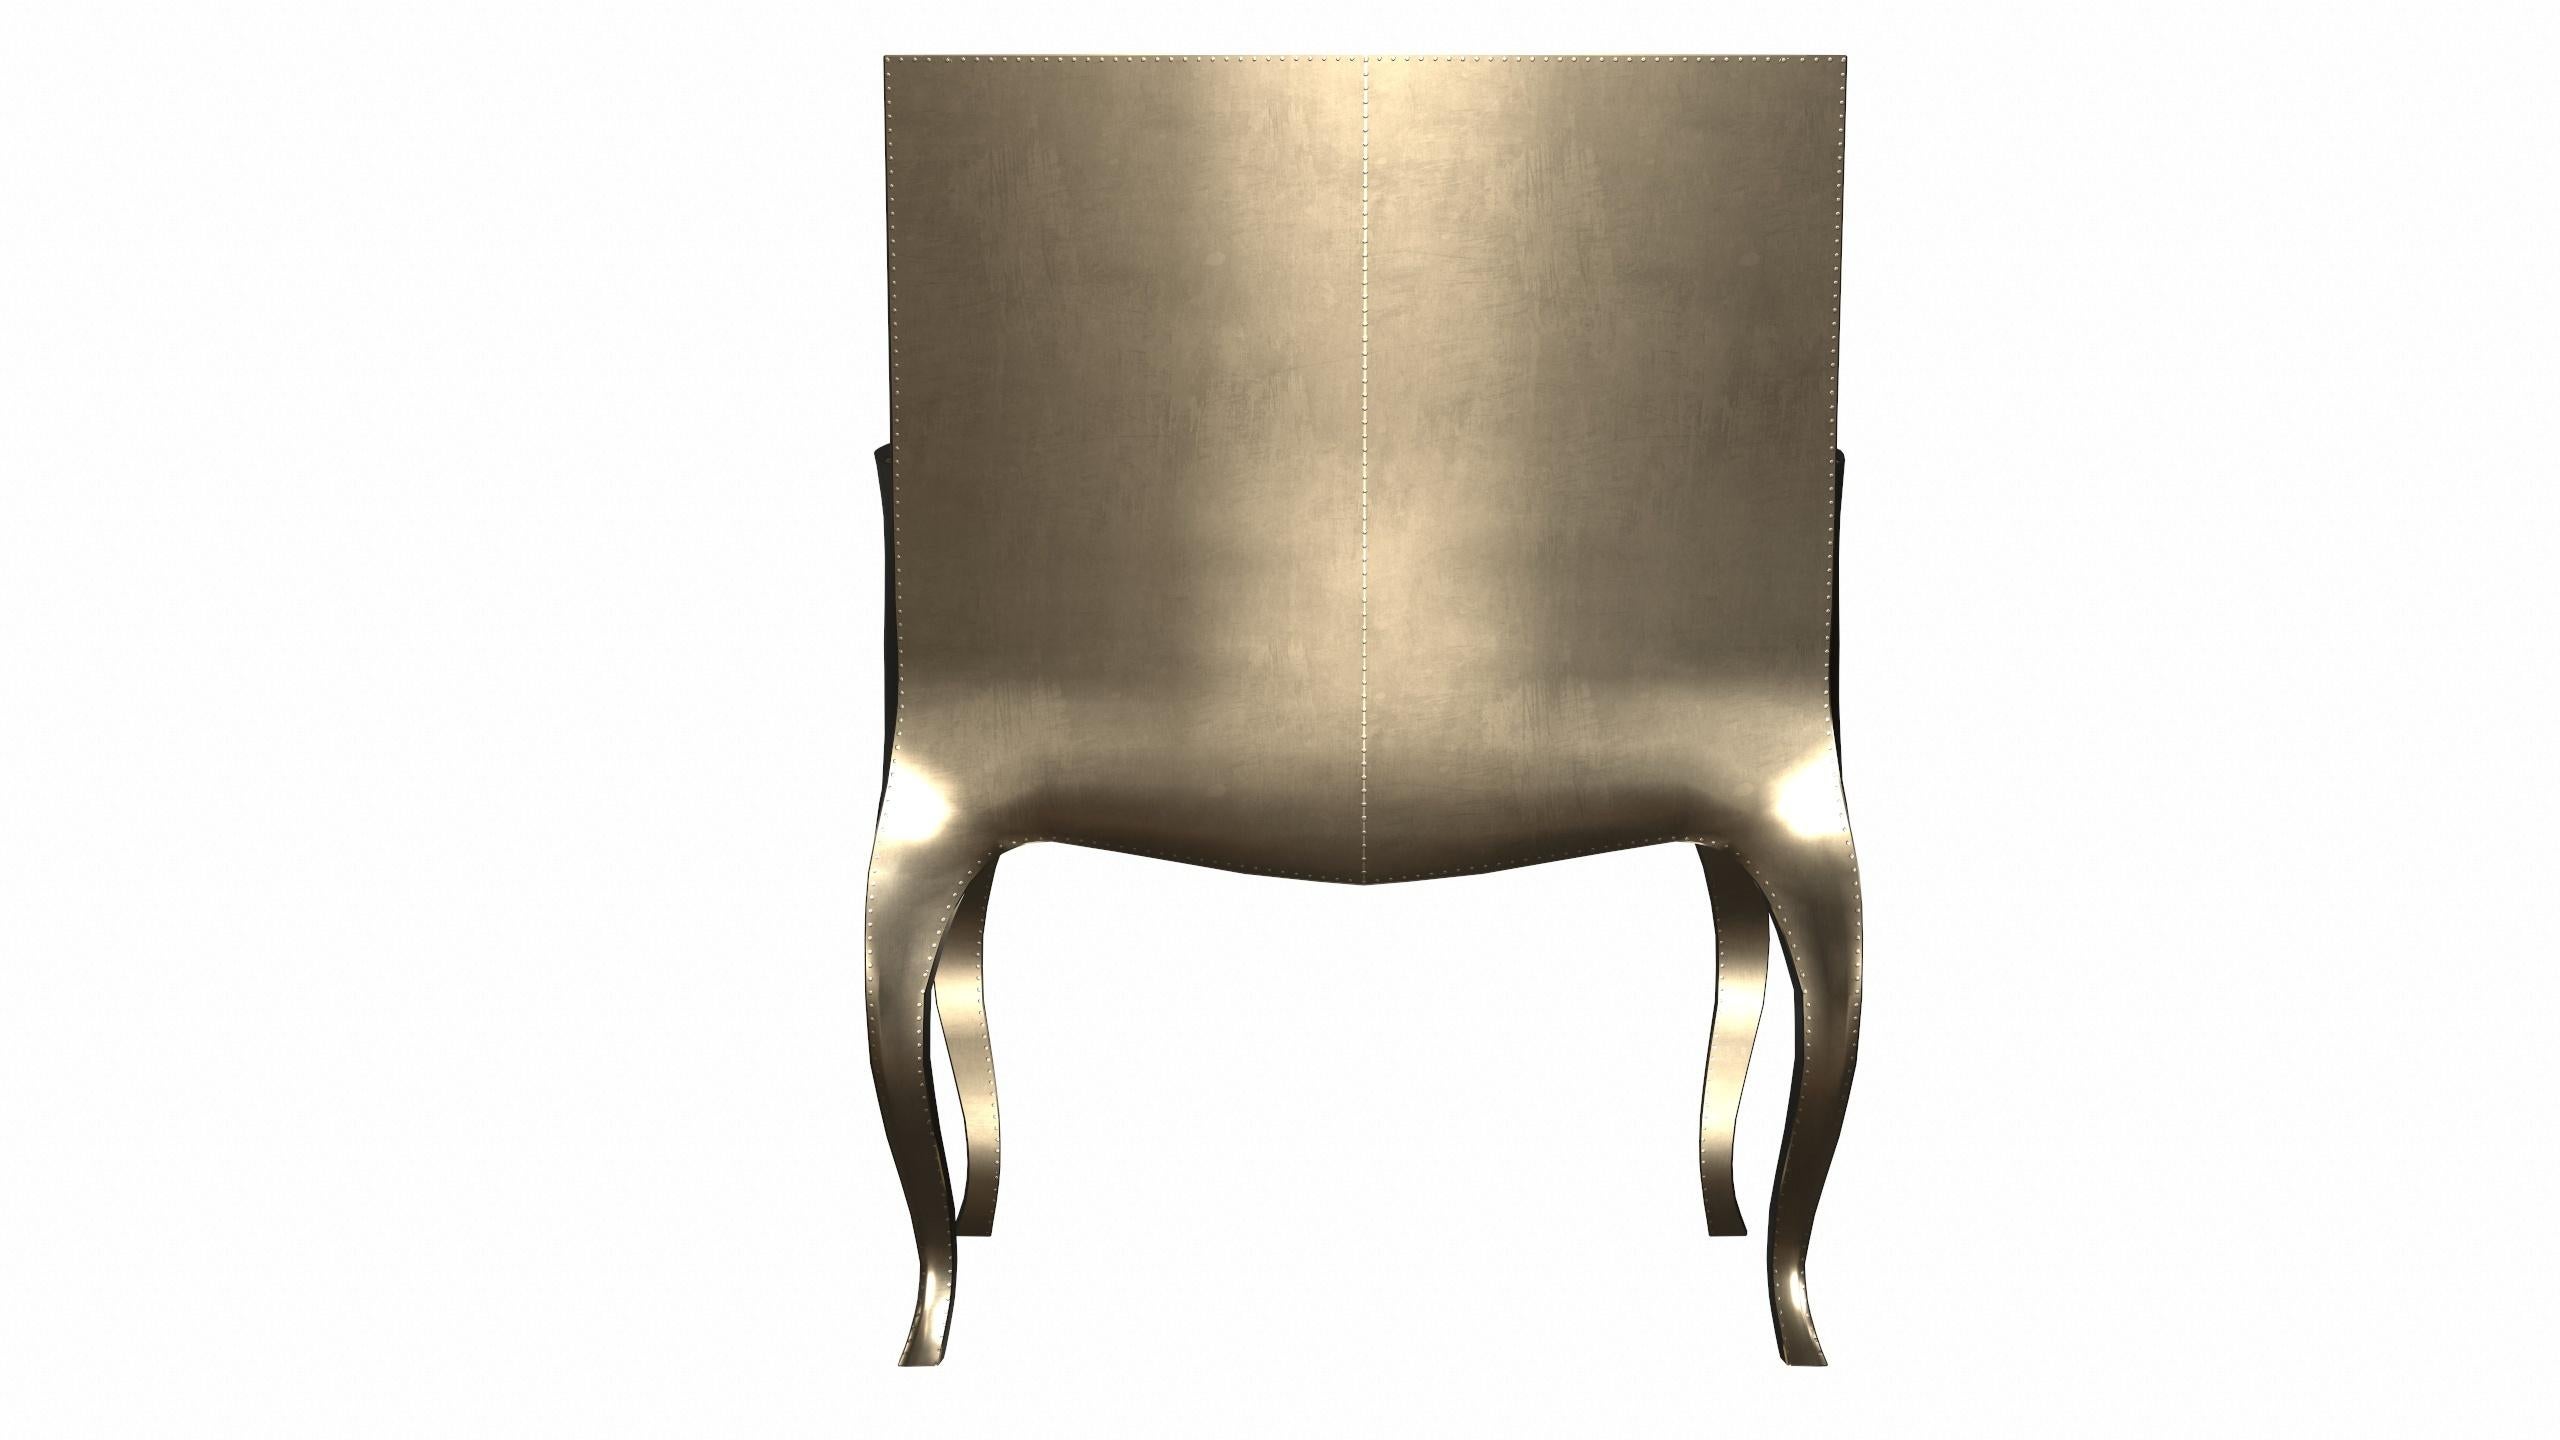 Art Deco Dining Room Chairs in Smooth Brass by Paul Mathieu for S. Odegard For Sale 1